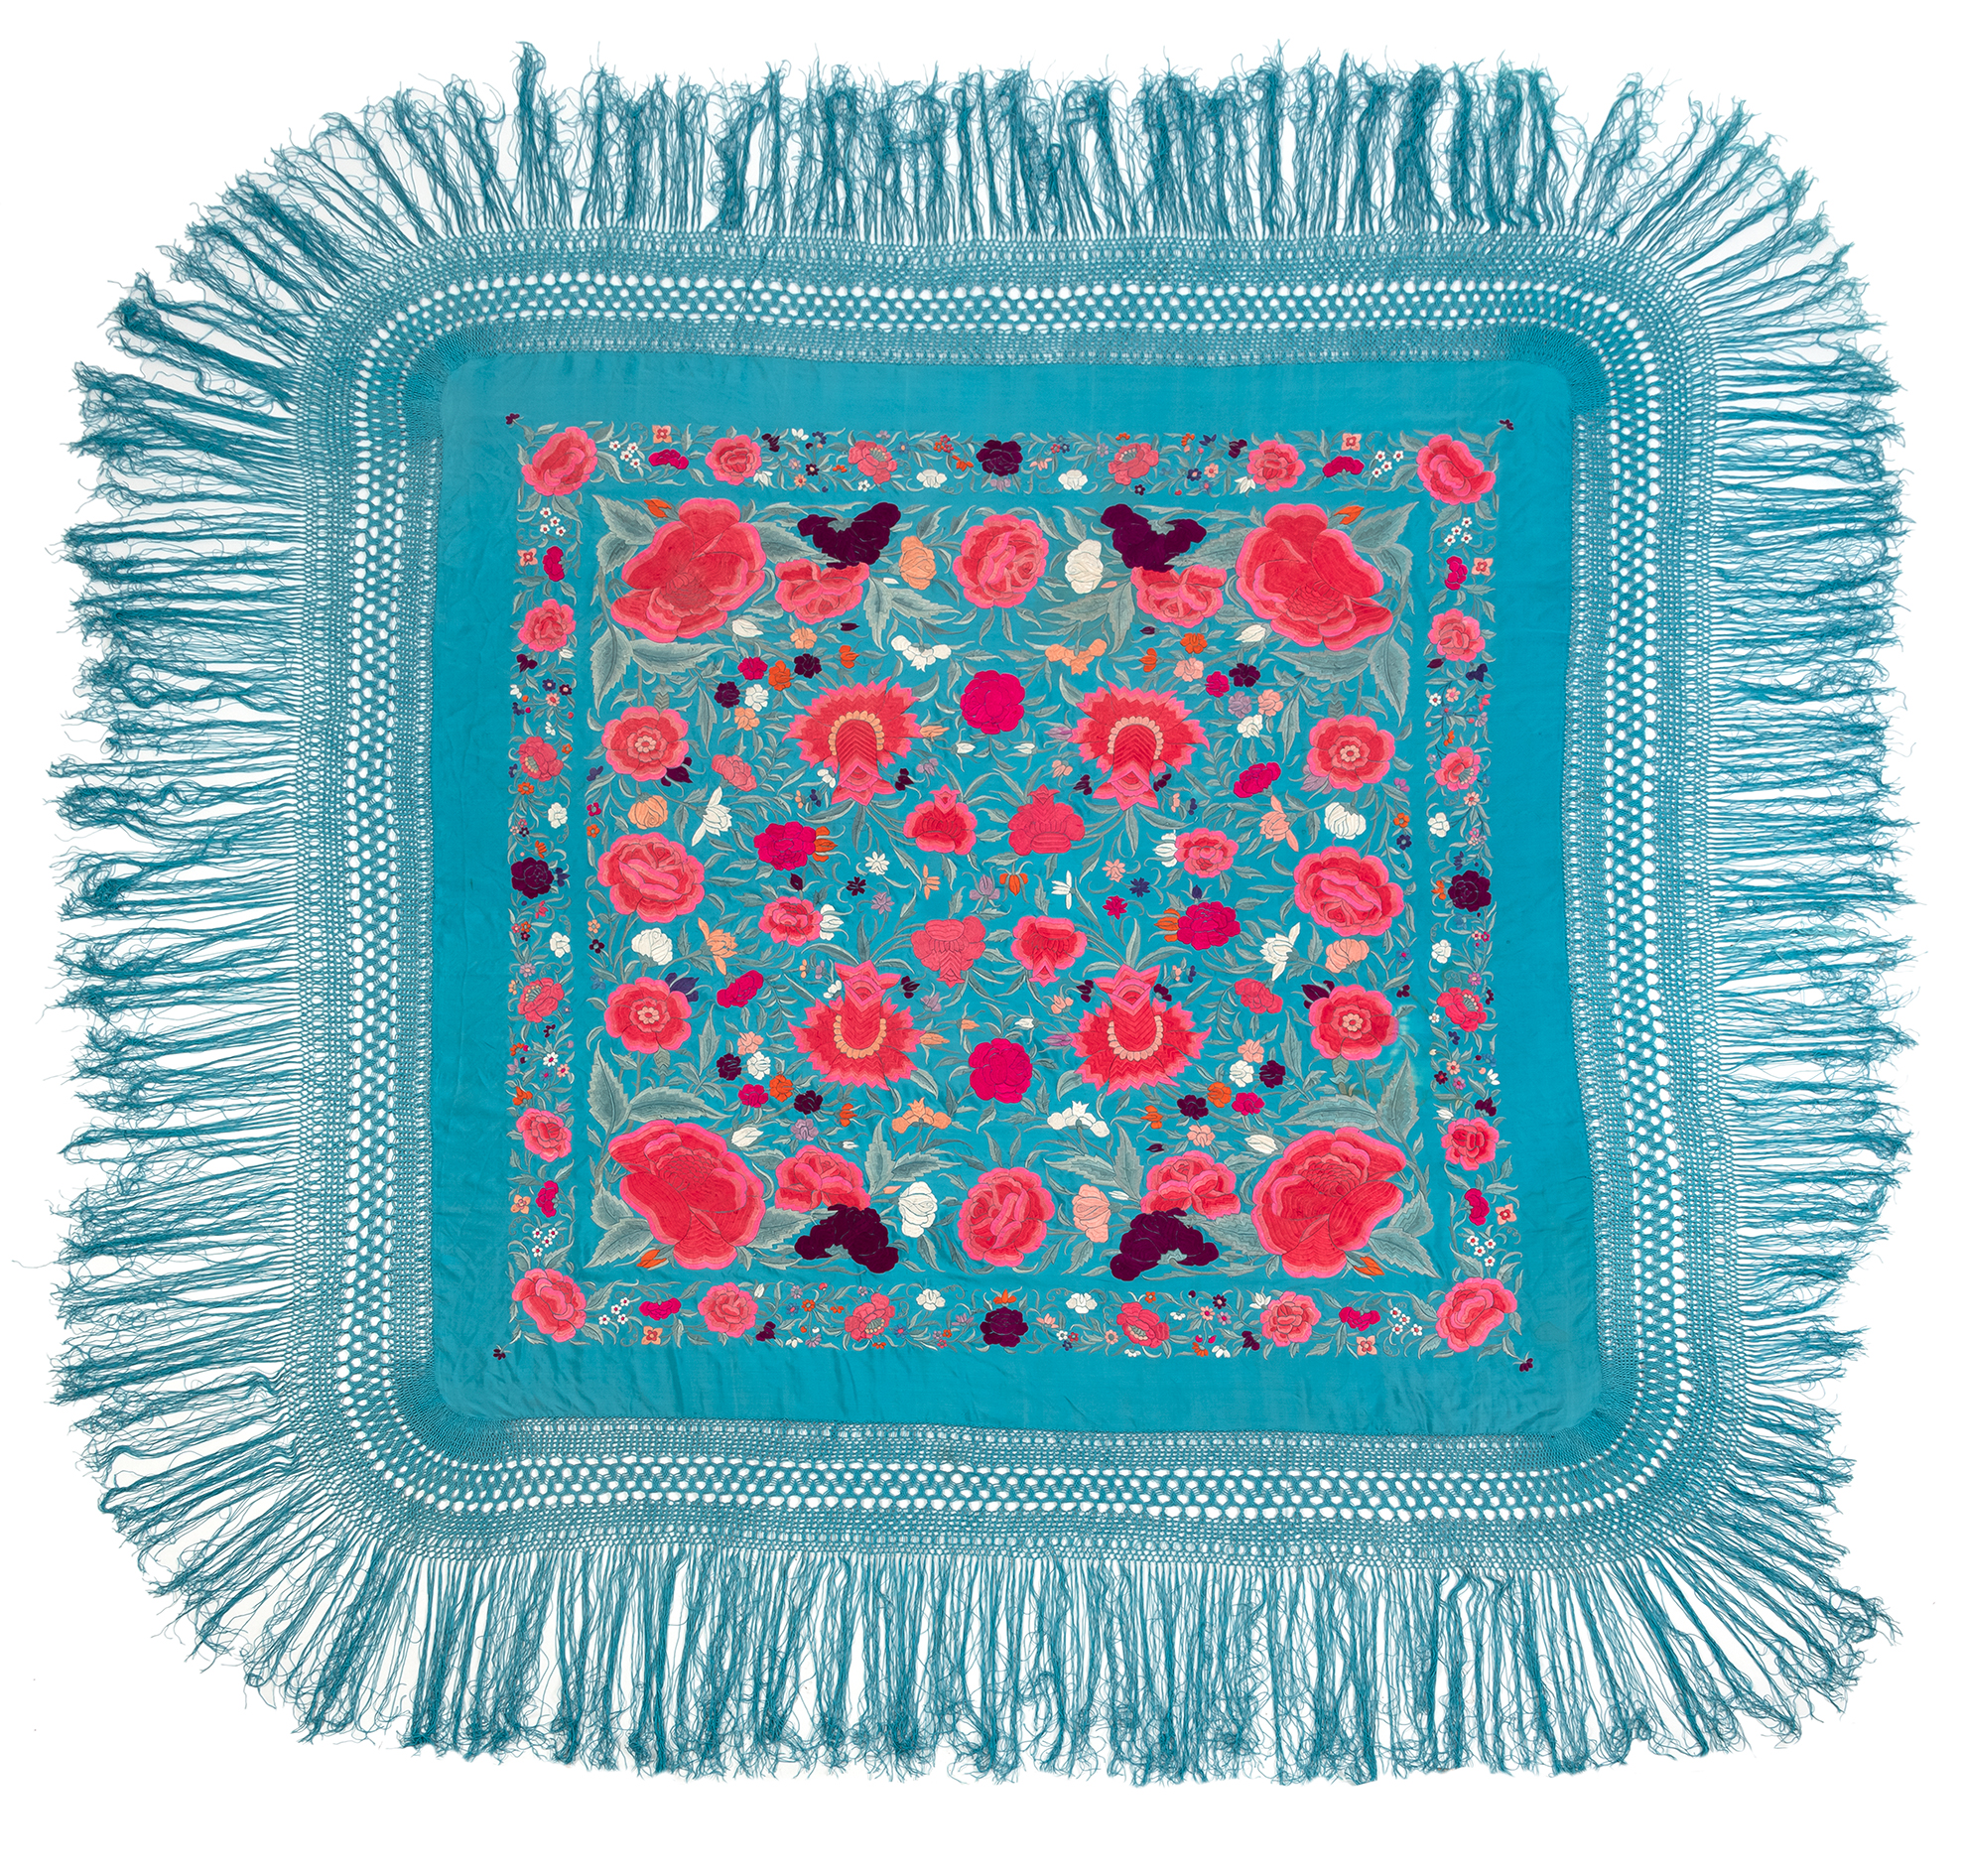 AN EMBROIDERED SILK COVER WITH PINK FLOWERS ON TURQUOISE SATIN AND KNOTTED FRINGES